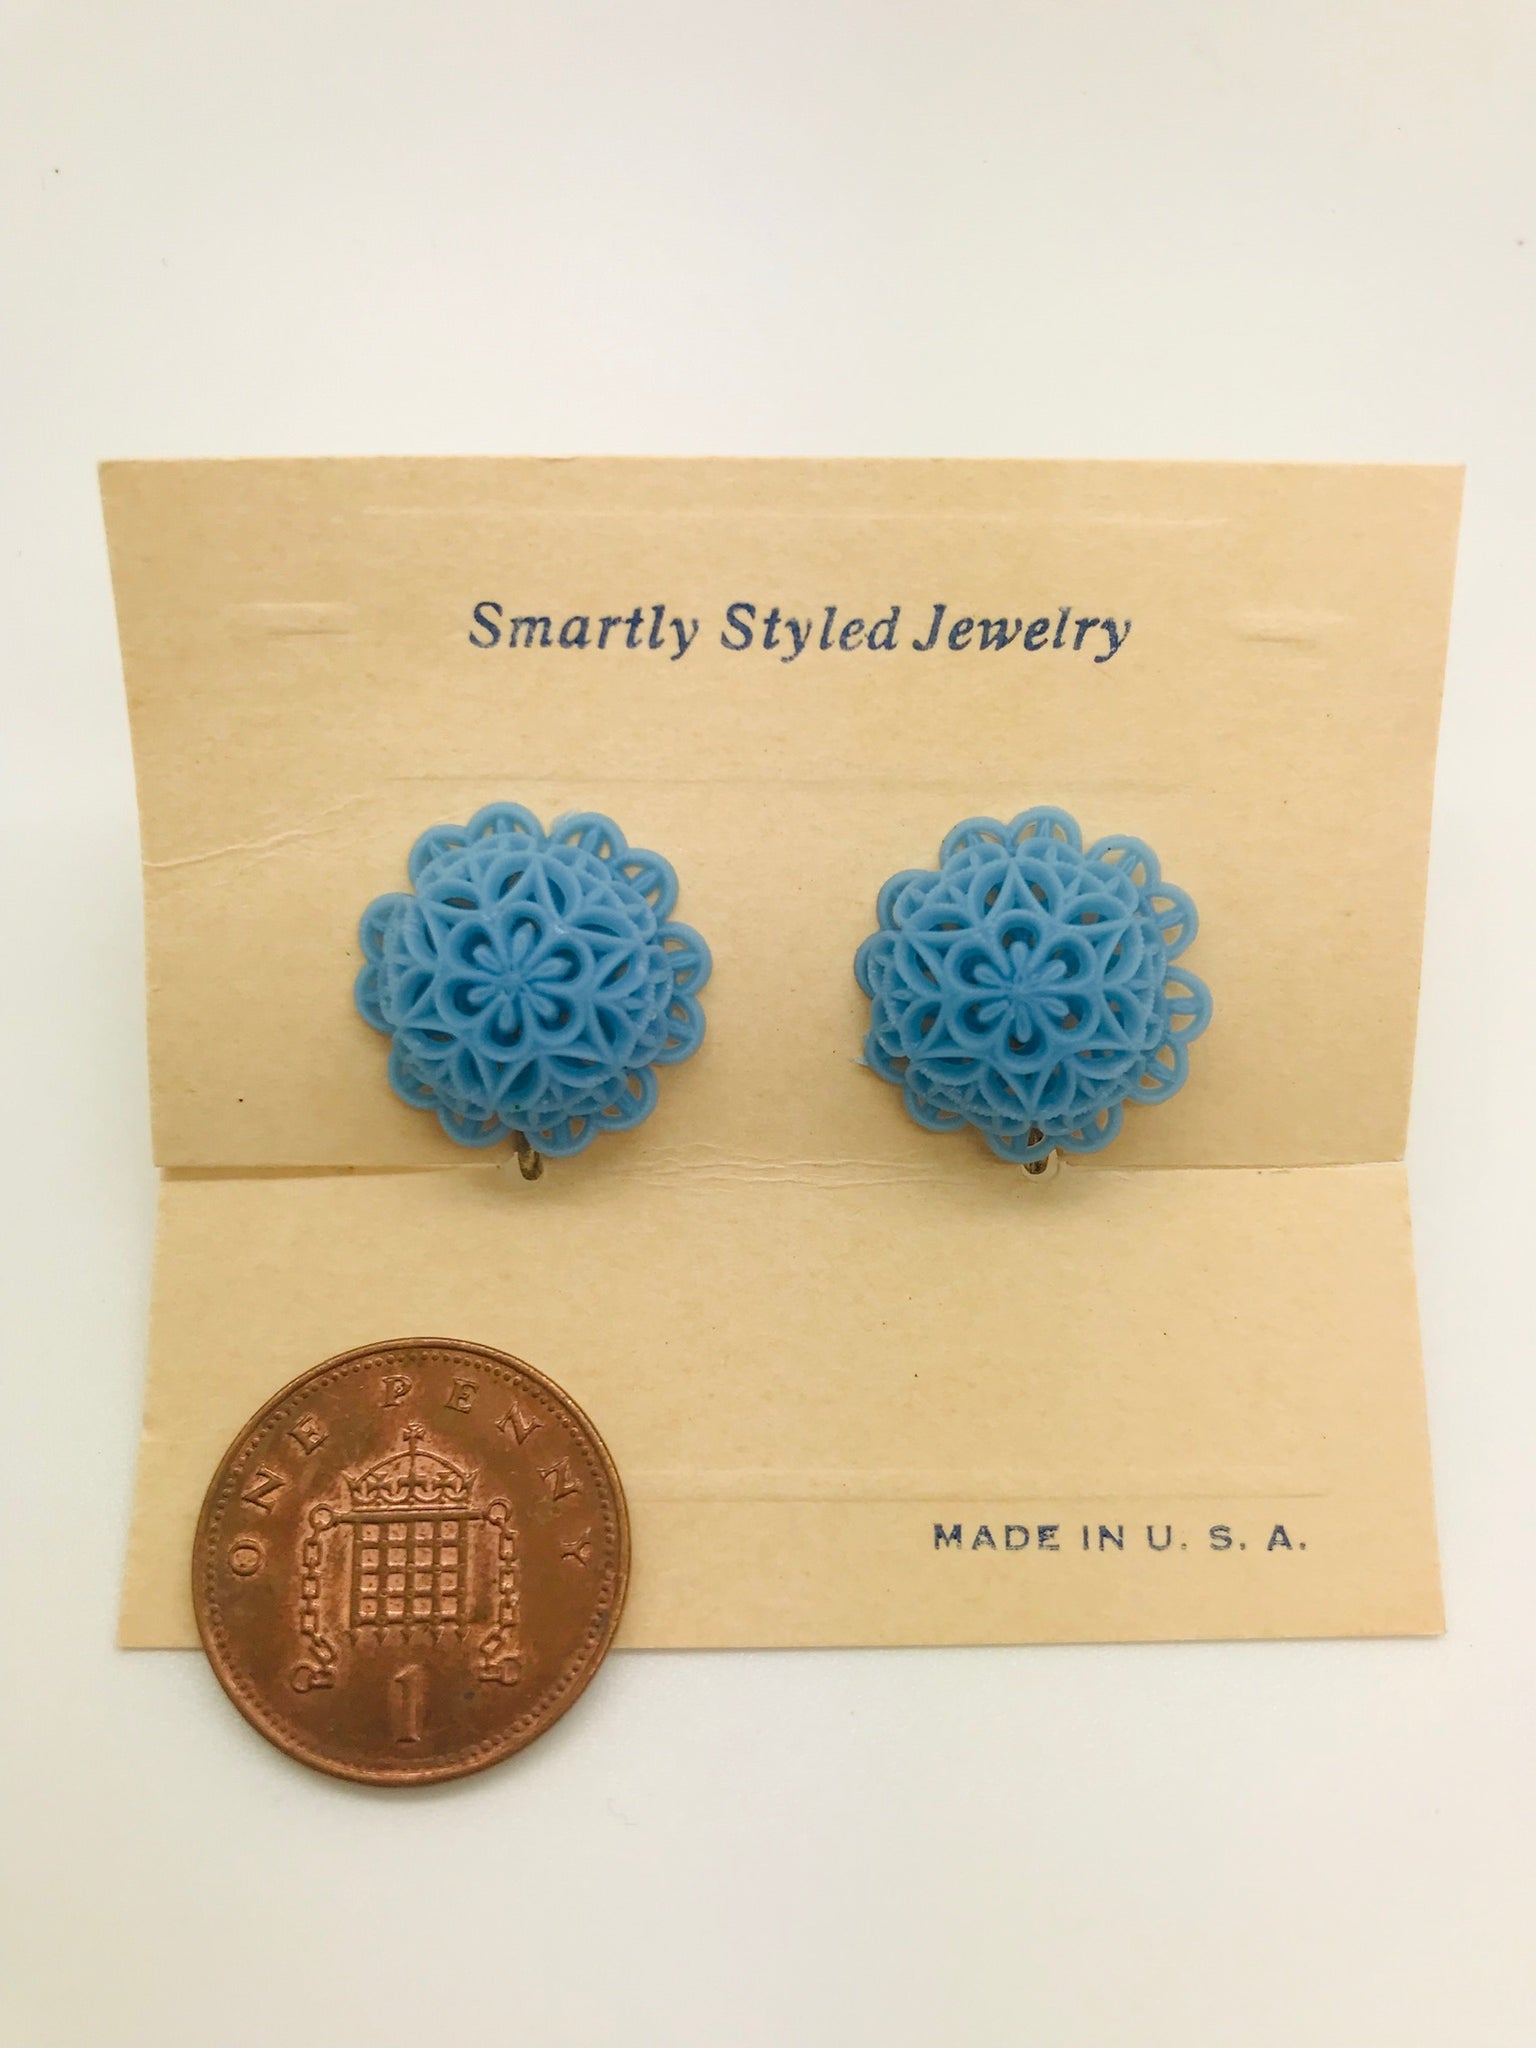 Authentic Vintage 1940s-50s Screw Back Dome Earrings in Blue Floral Lace Acrylic Resin by The Schein Brothers - True and authentic vintage style clothing, inspired by the Classic styles of CC41 , WW2 and the fun 1950s RocknRoll era, for everyday wear plus events like Goodwood Revival, Twinwood Festival and Viva Las Vegas Rockabilly Weekend Rock n Romance Rock n Romance